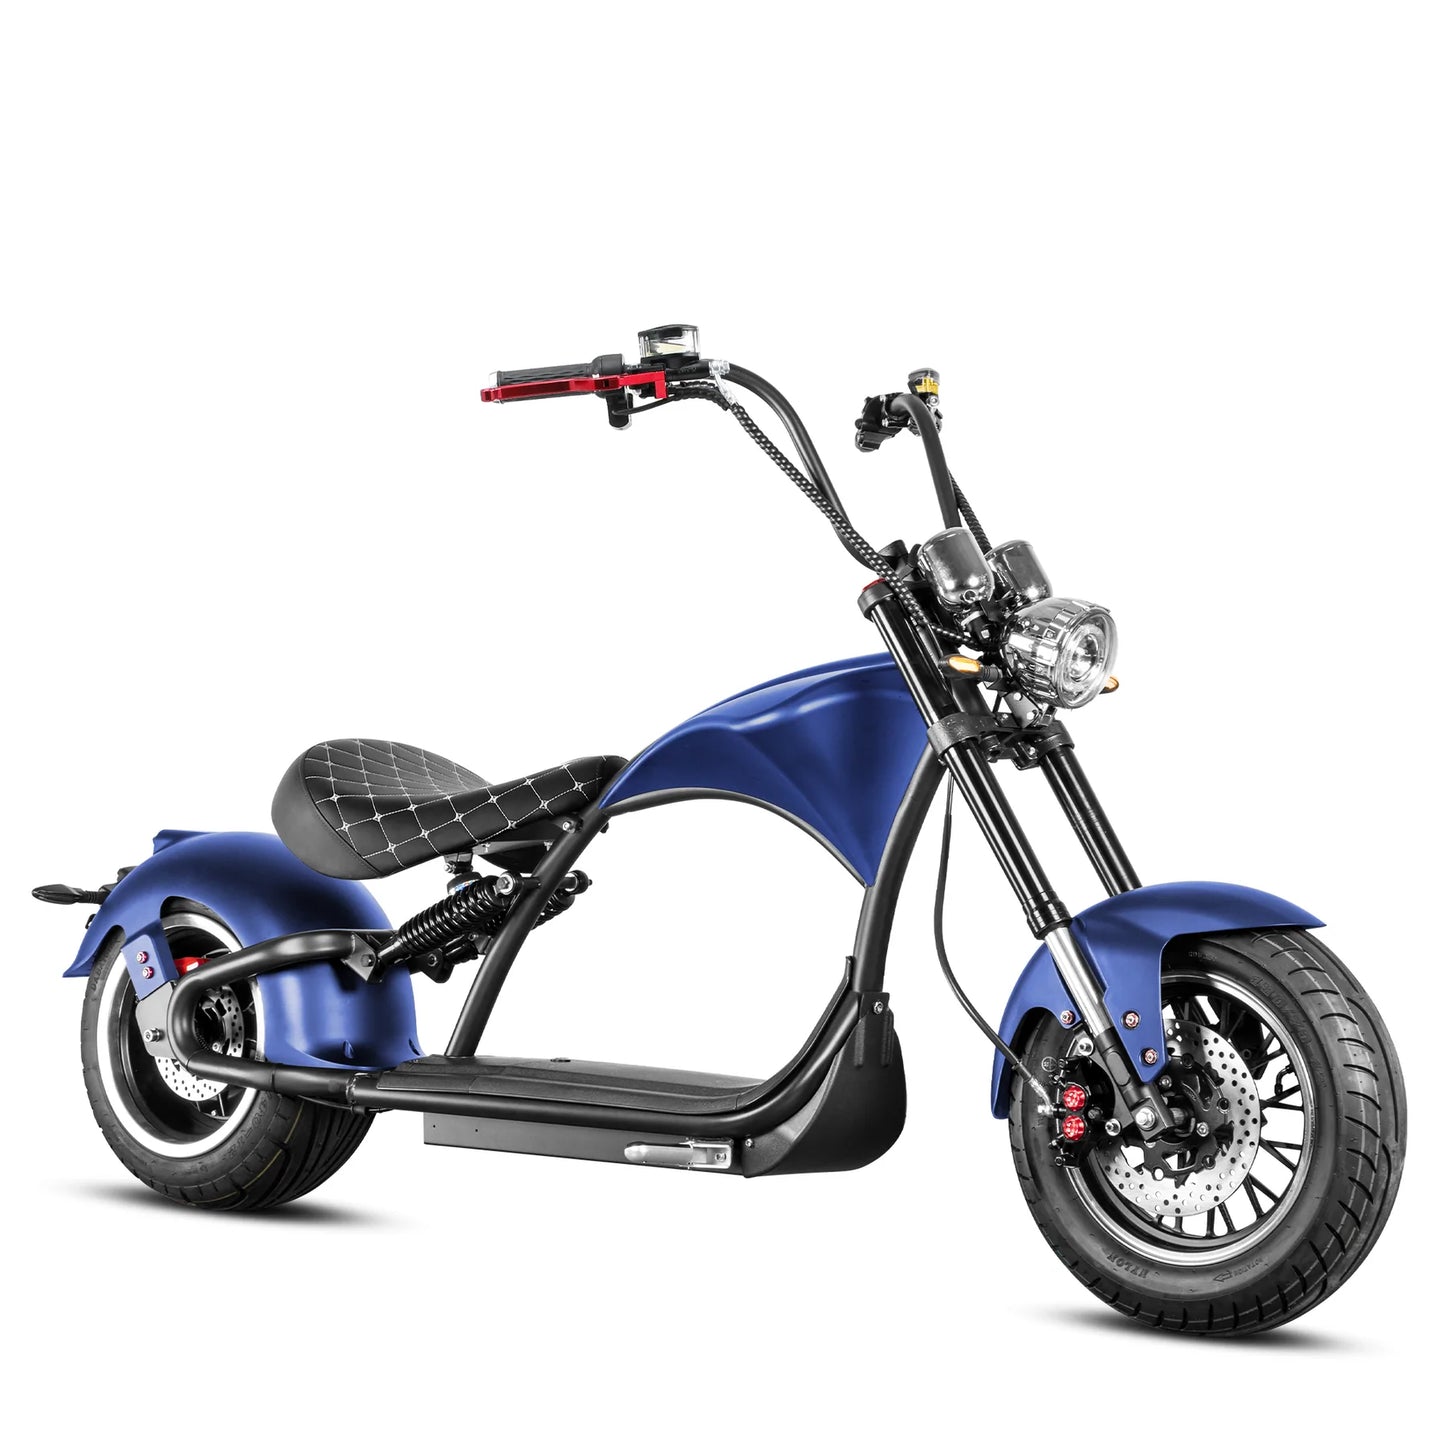 Eahora Emars M1P Electric Scooter - Blueberries Blue | Bike Lover USA